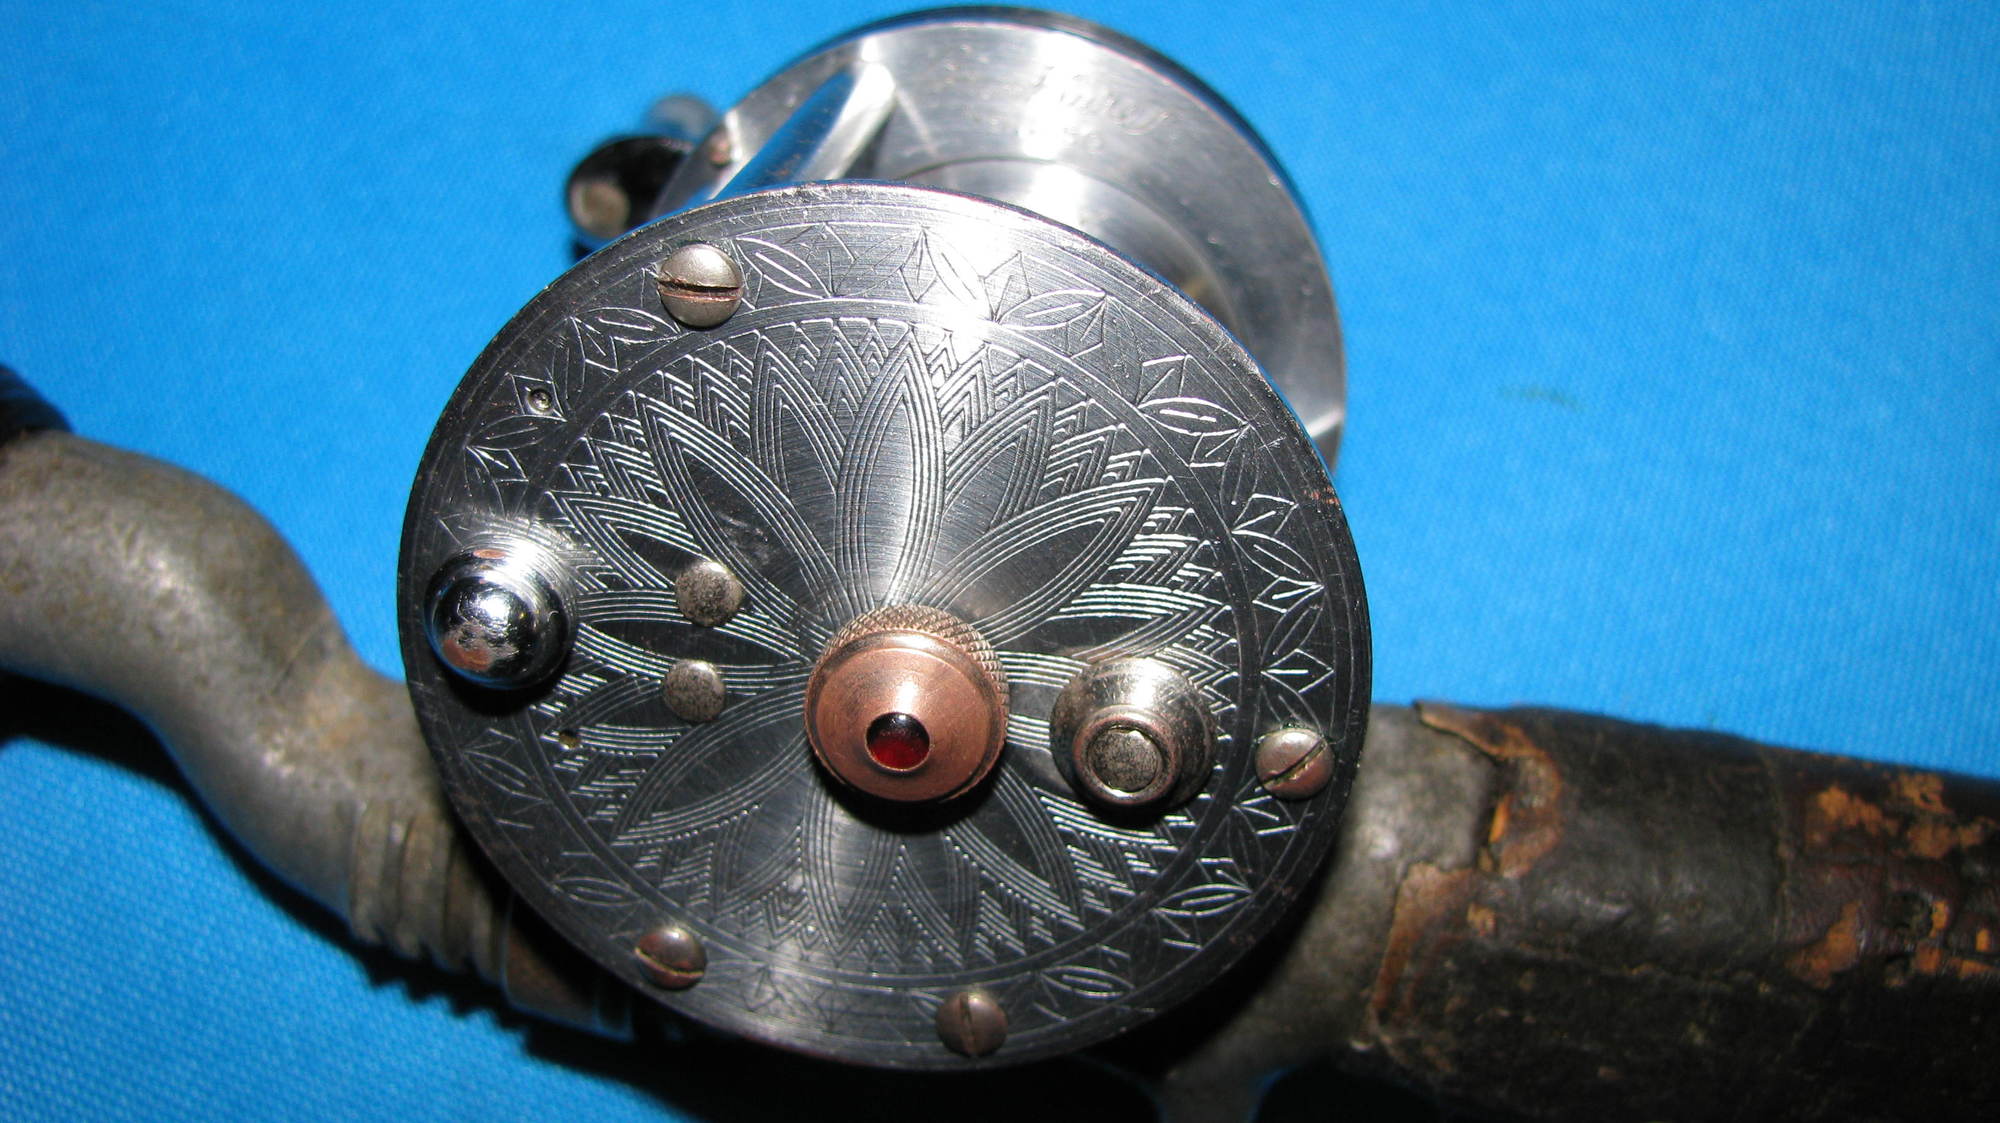 Posts about Vintage Fishing Reels on COLLECTING, ETC.